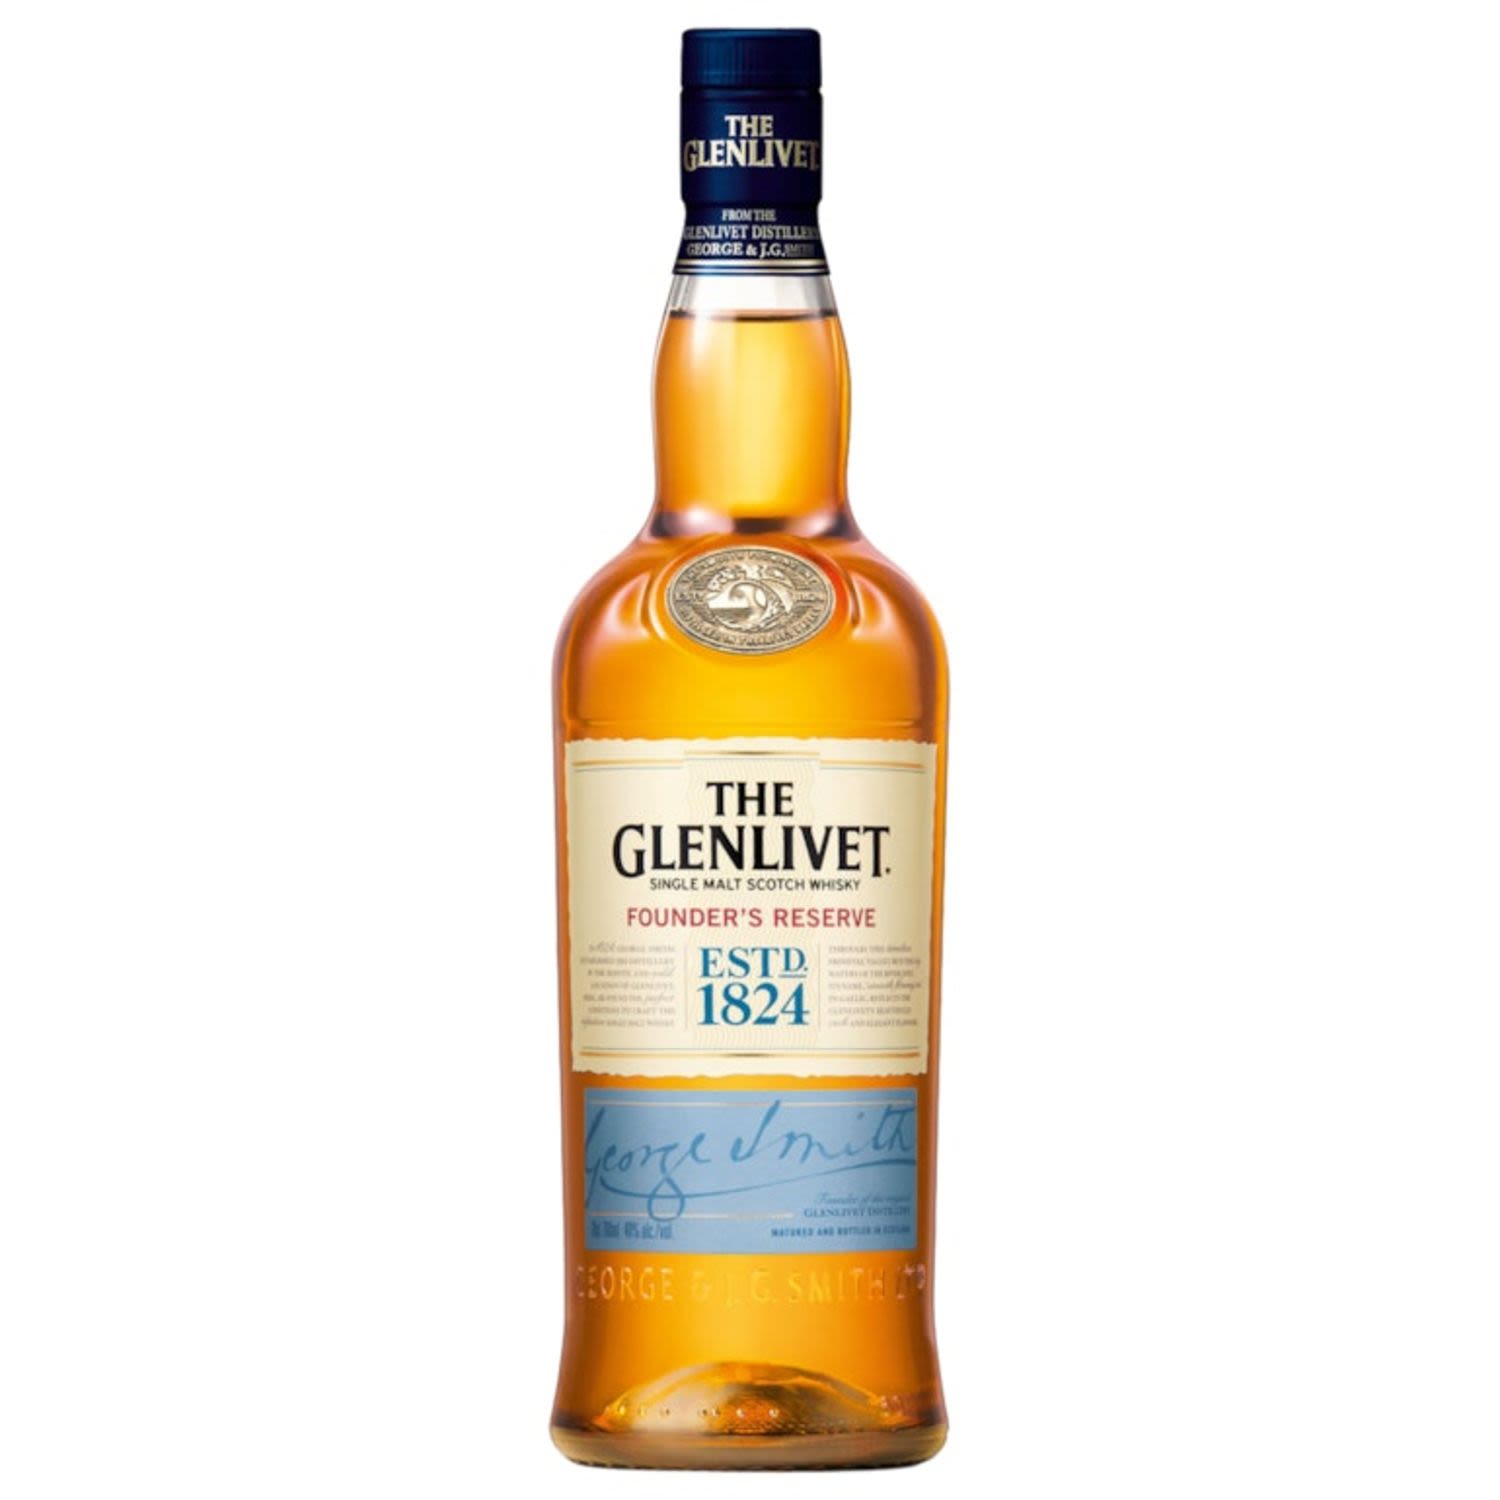 The Glenlivet Founder's Reserve, skilful selection of casks enhances the signature fruity flavours of The Glenlivet with traditional oak casks being complemented by selective use of American first-fill casks to give a hint of creamy sweetness, creating an exceptionally well-balanced and smooth malt.<br /> <br />Alcohol Volume: 40.00%<br /><br />Pack Format: Bottle<br /><br />Standard Drinks: 22.1</br /><br />Pack Type: Bottle<br /><br />Country of Origin: Scotland<br />